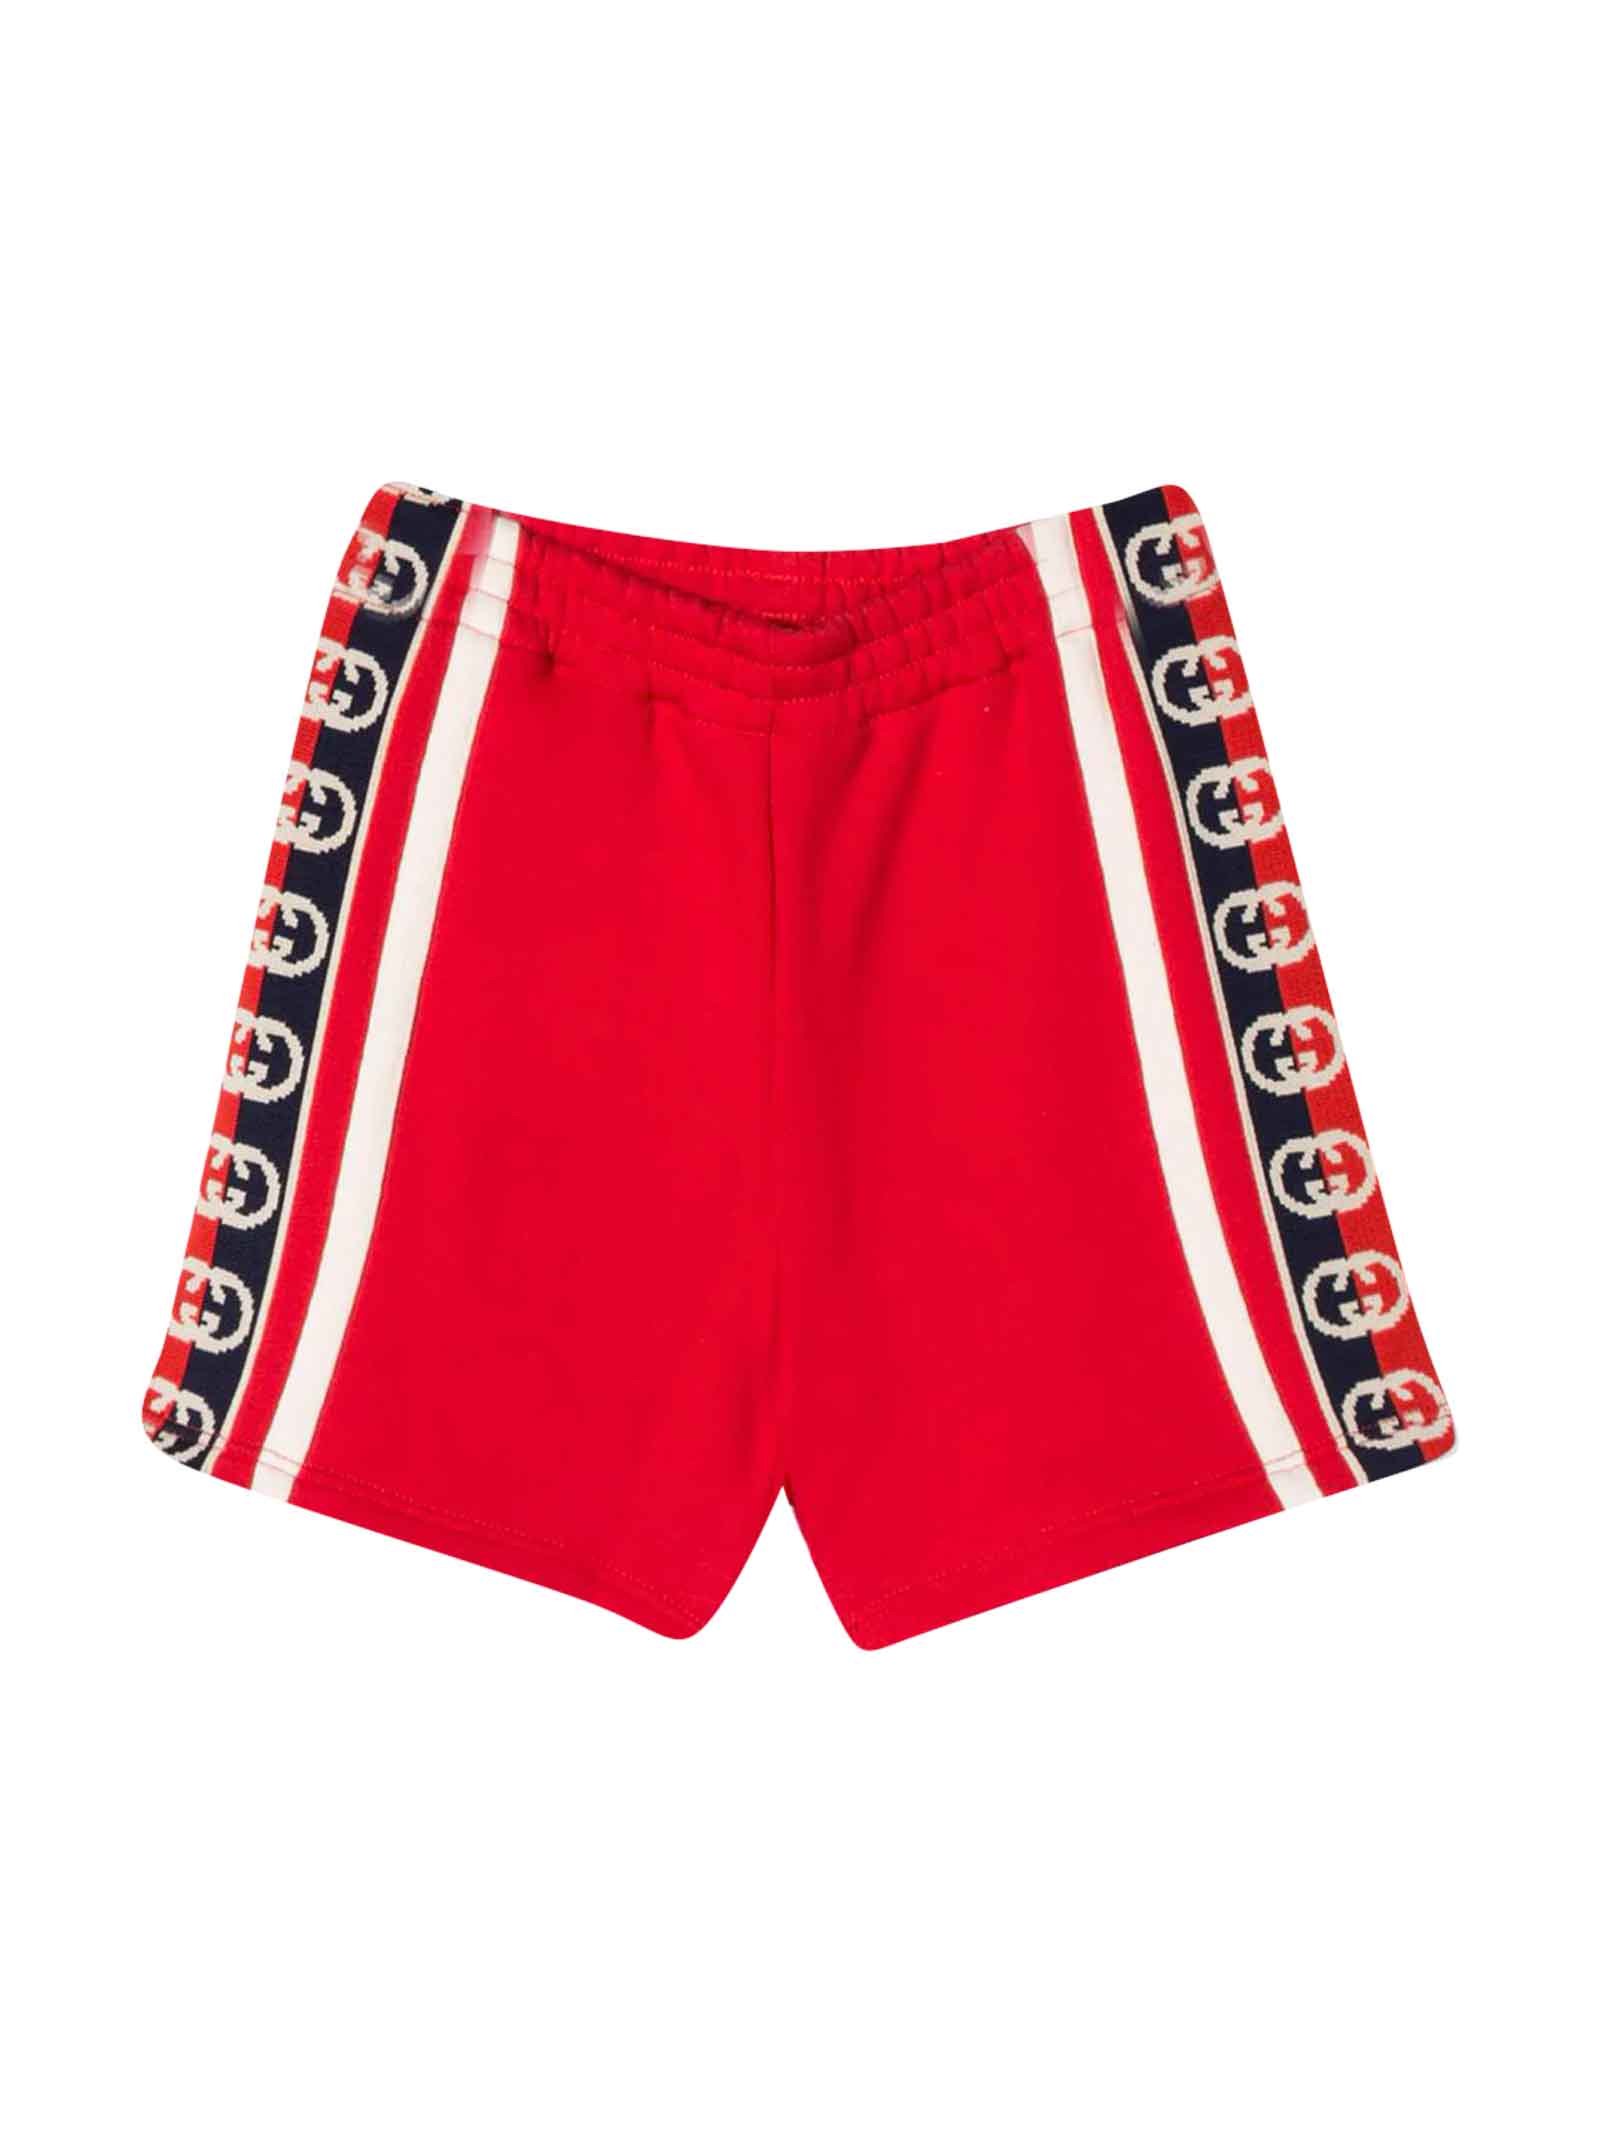 GUCCI RED AND WHITE BERMUDA SHORTS,11277208